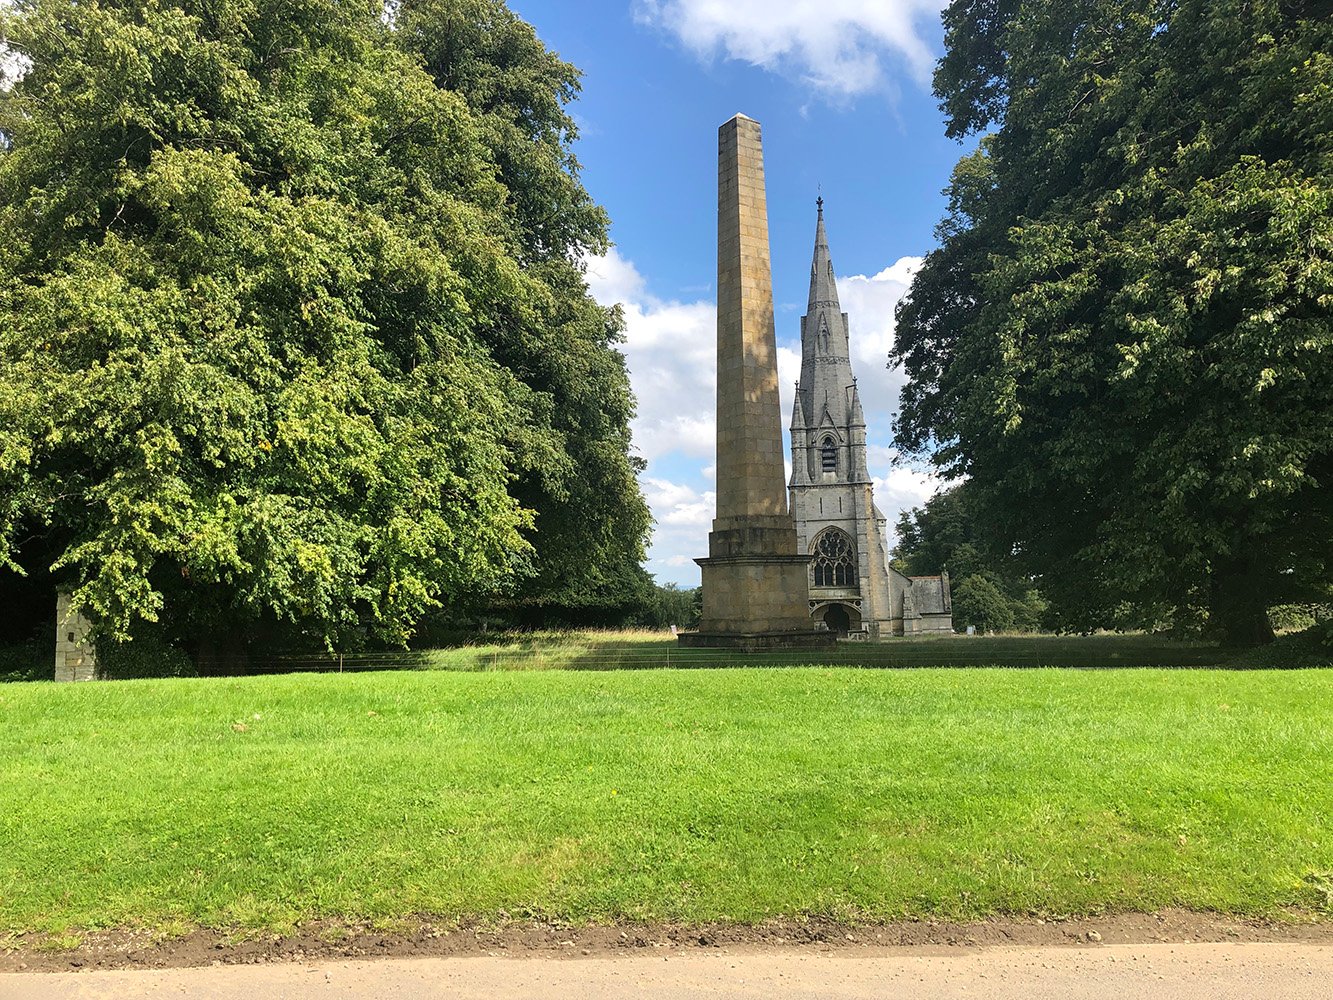 Image name obelisk and church studley royal fountains abbey north yorkshire the 14 image from the post A look at the history of Studley Royal, North Yorkshire, with Dr Emma Wells in Yorkshire.com.